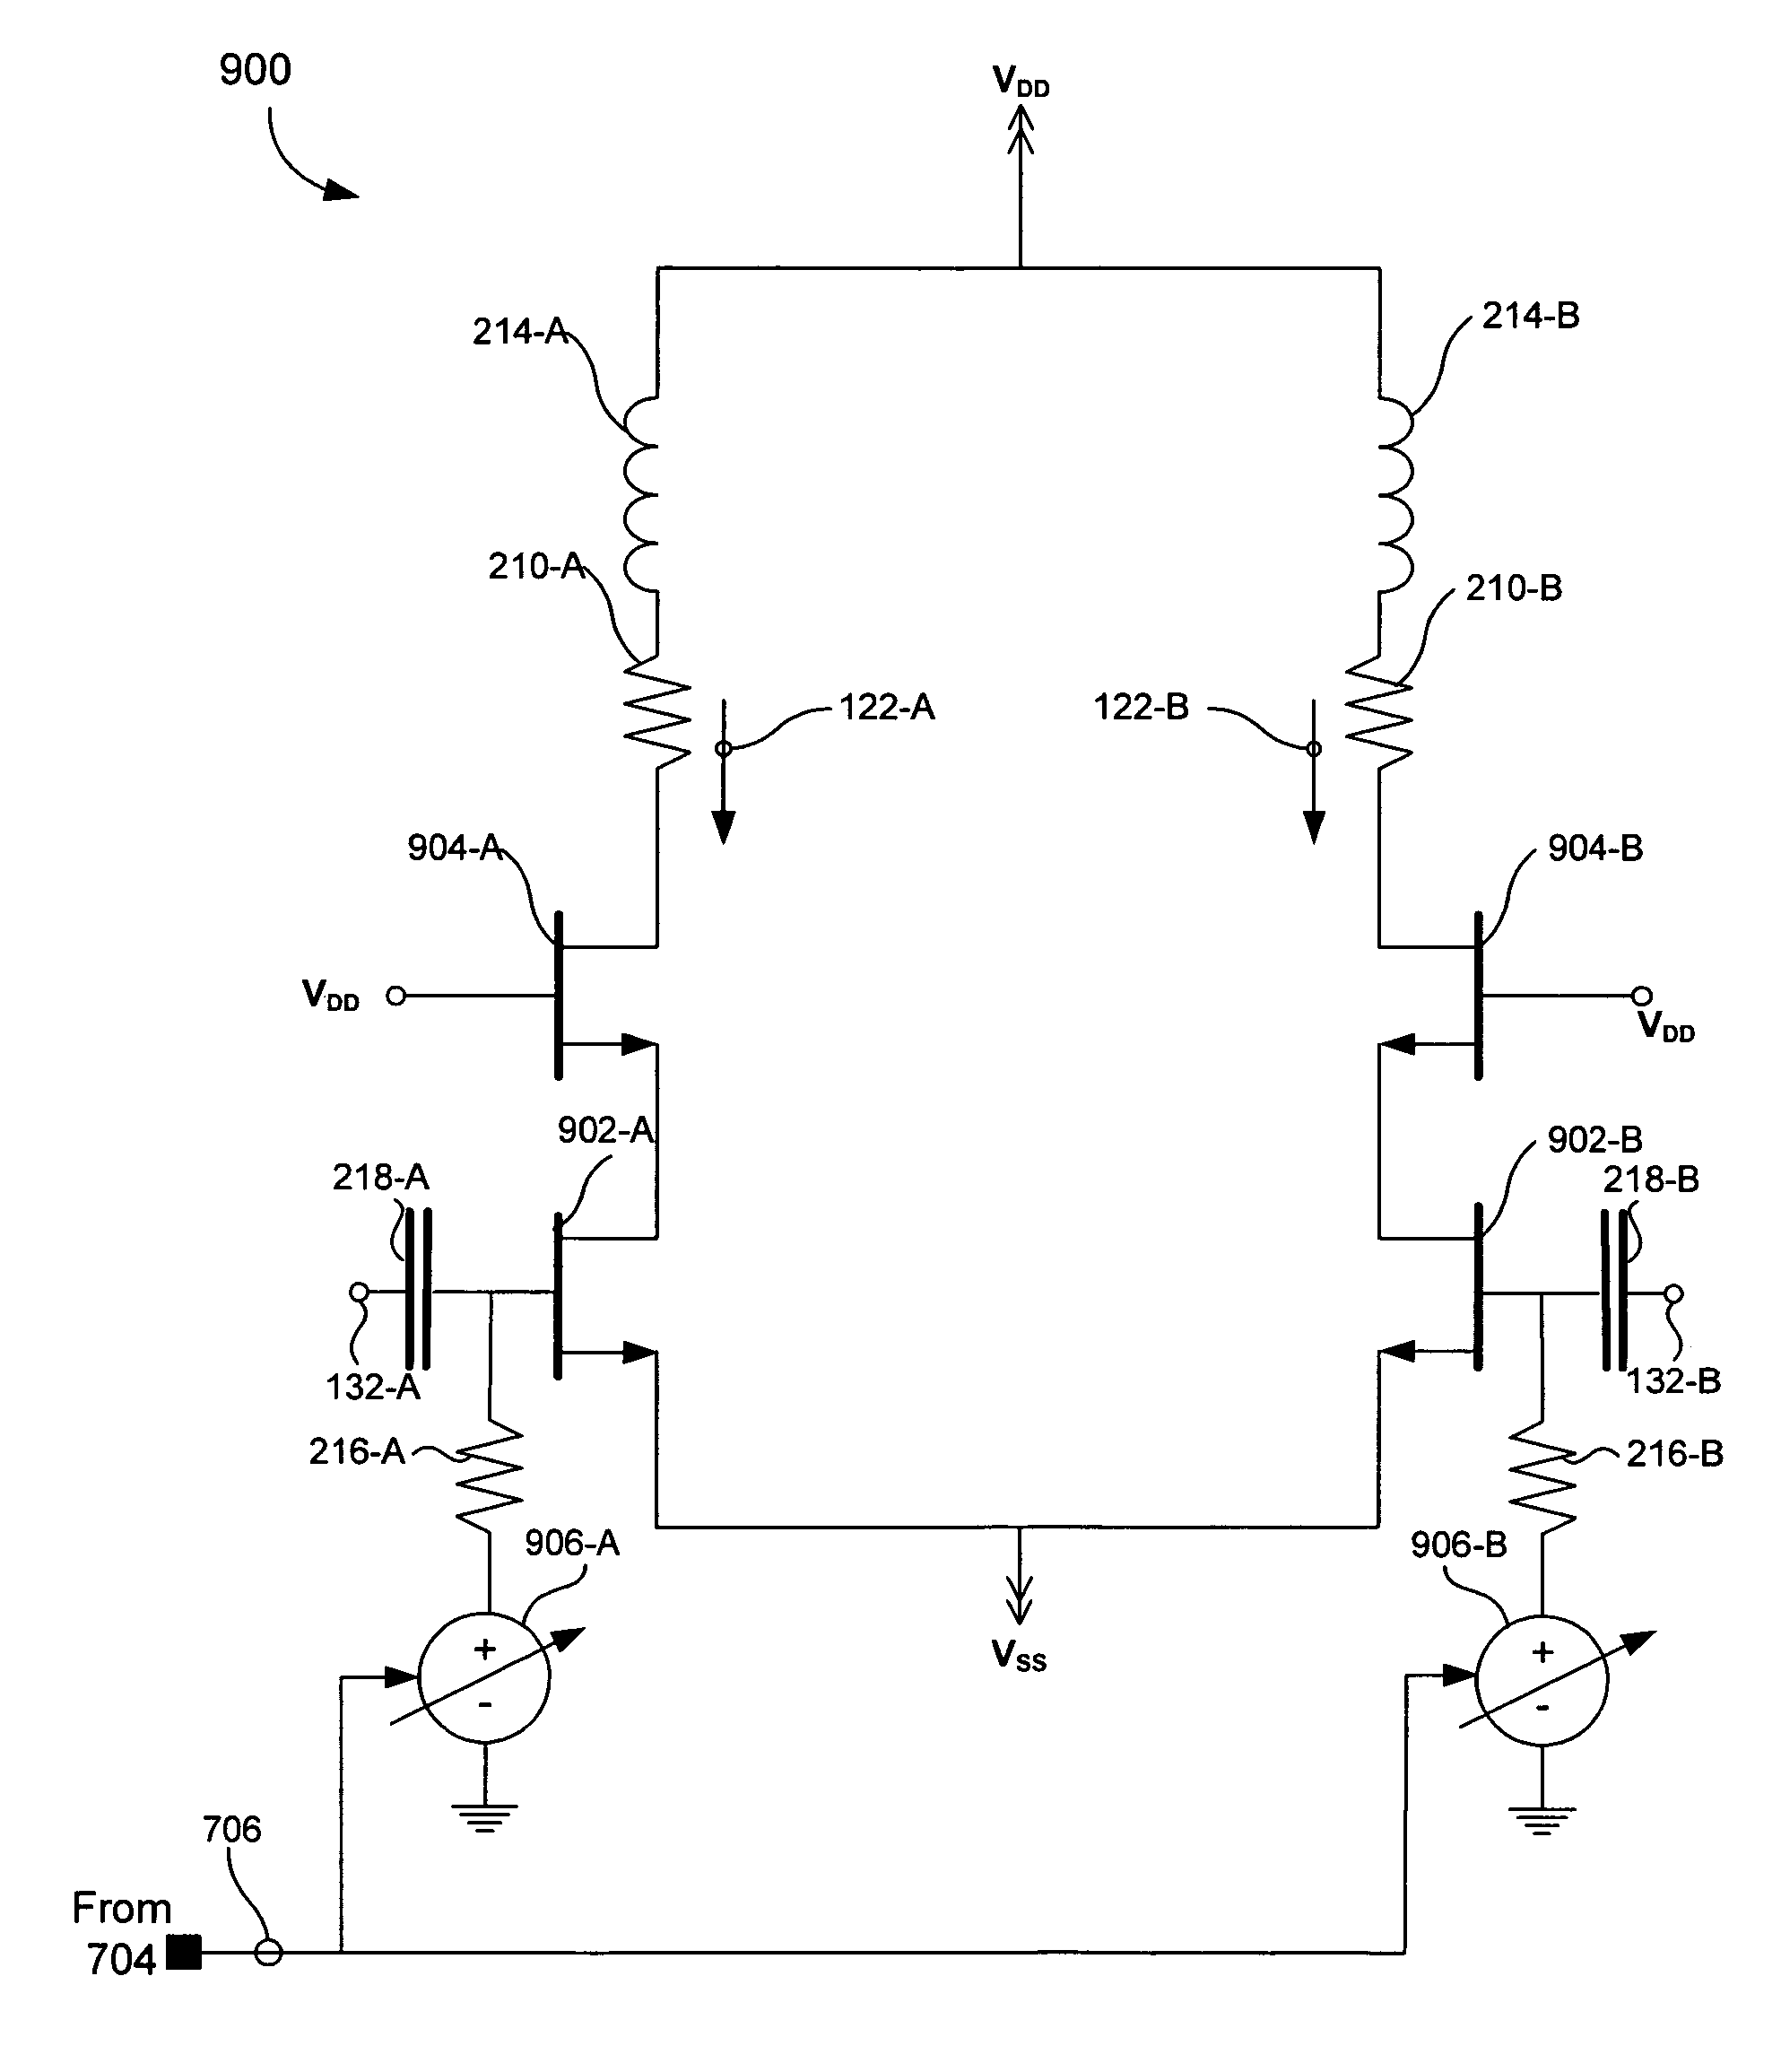 Linear and non-linear dual mode transmitter